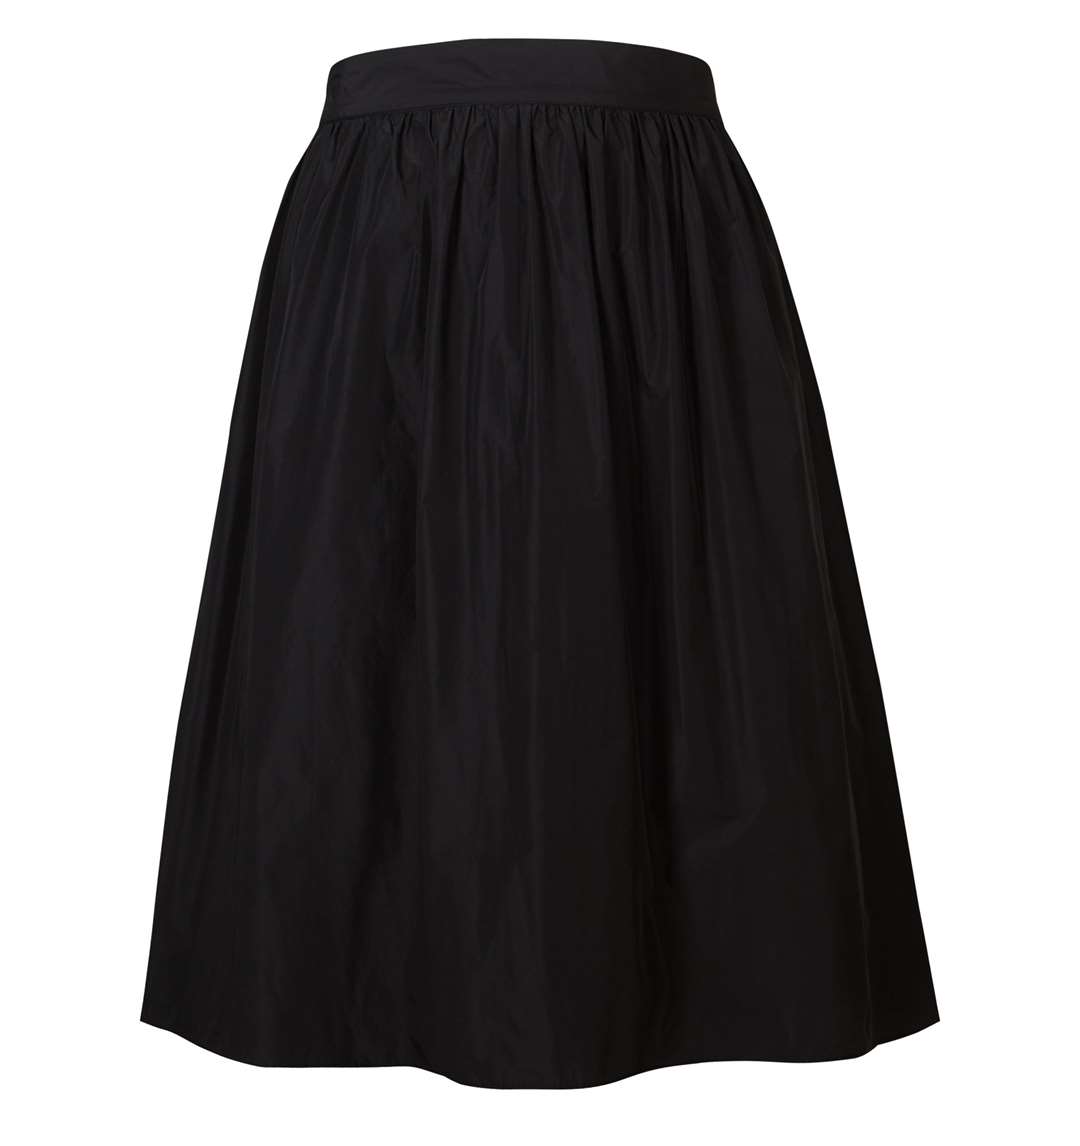 Collection Curve skirt, £45. Available January 23